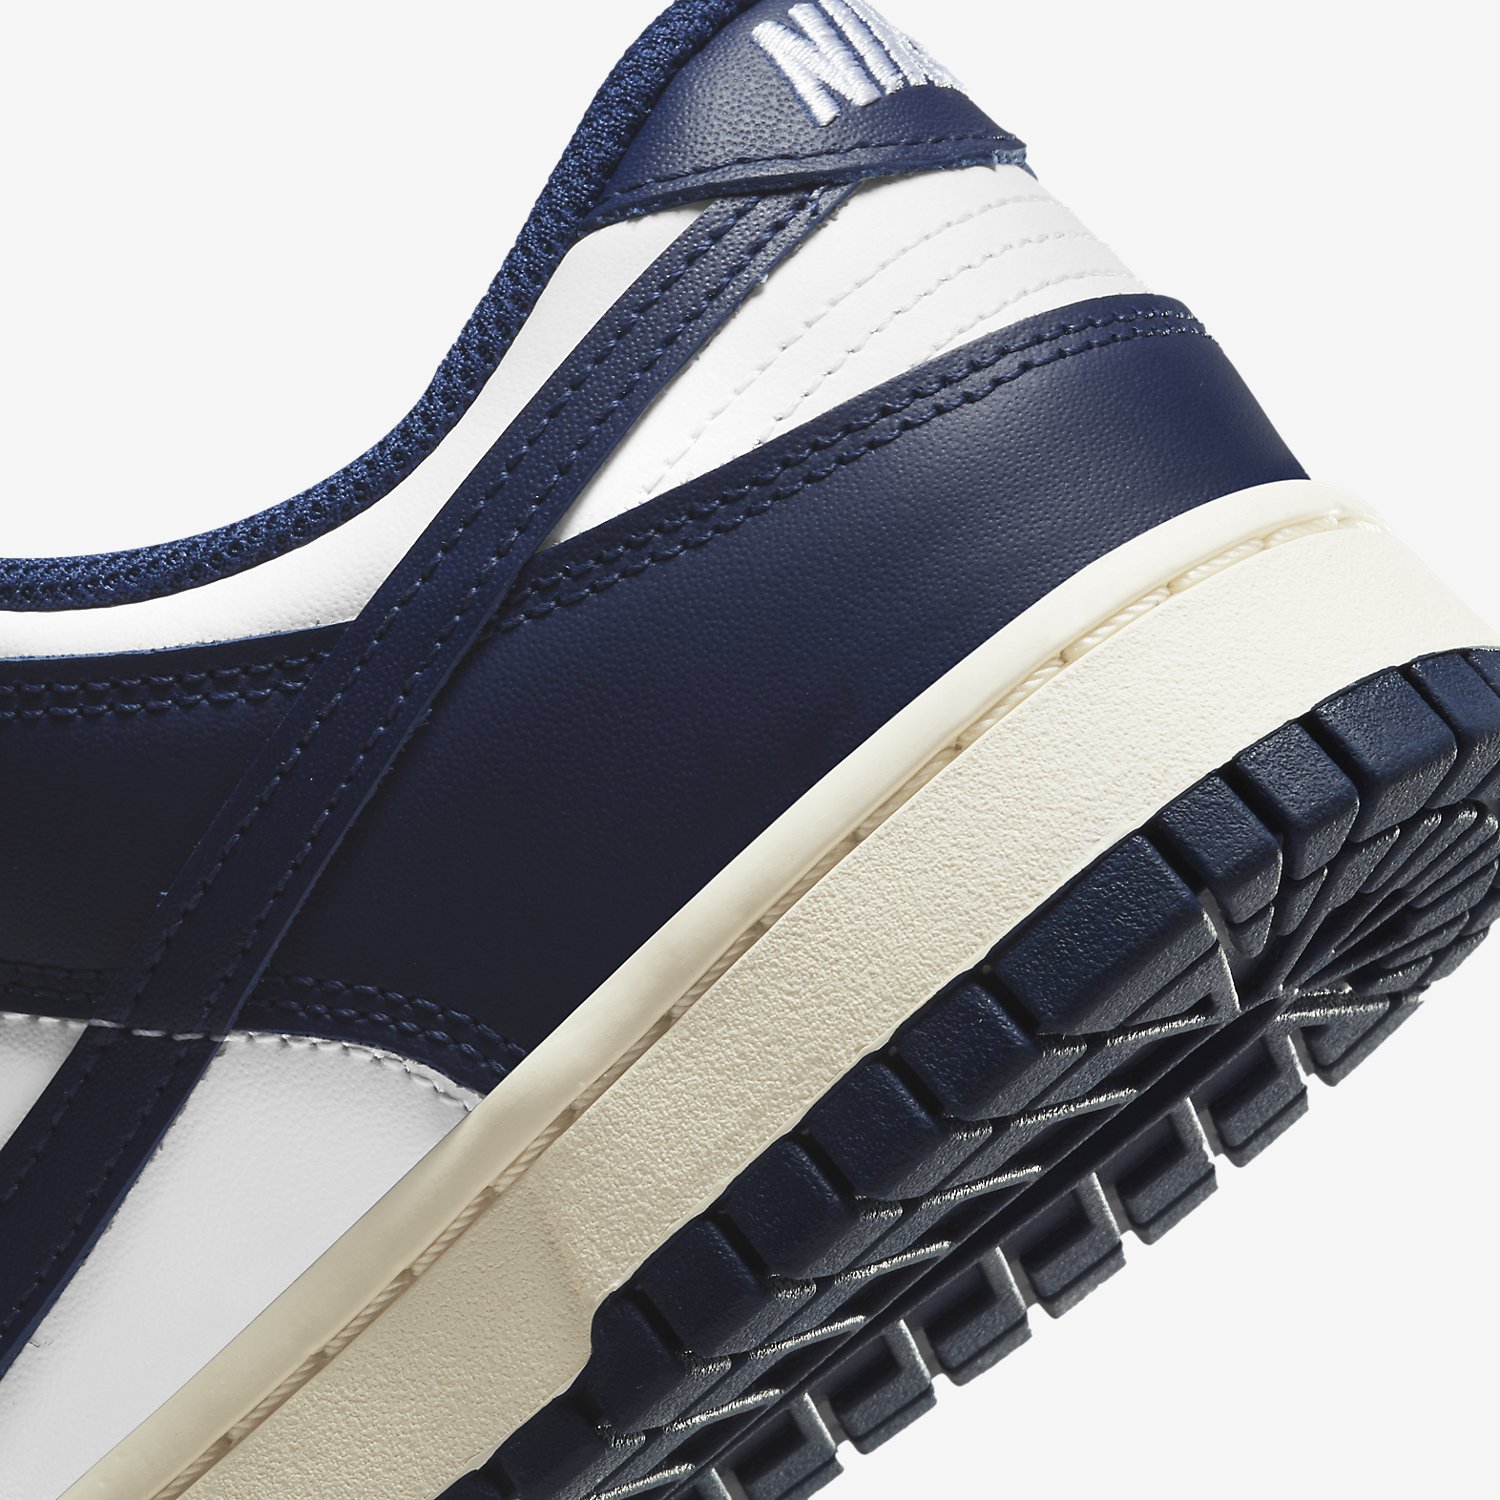 Nike Dunk Low "Vintage Navy" Official Images | Sneaktorious